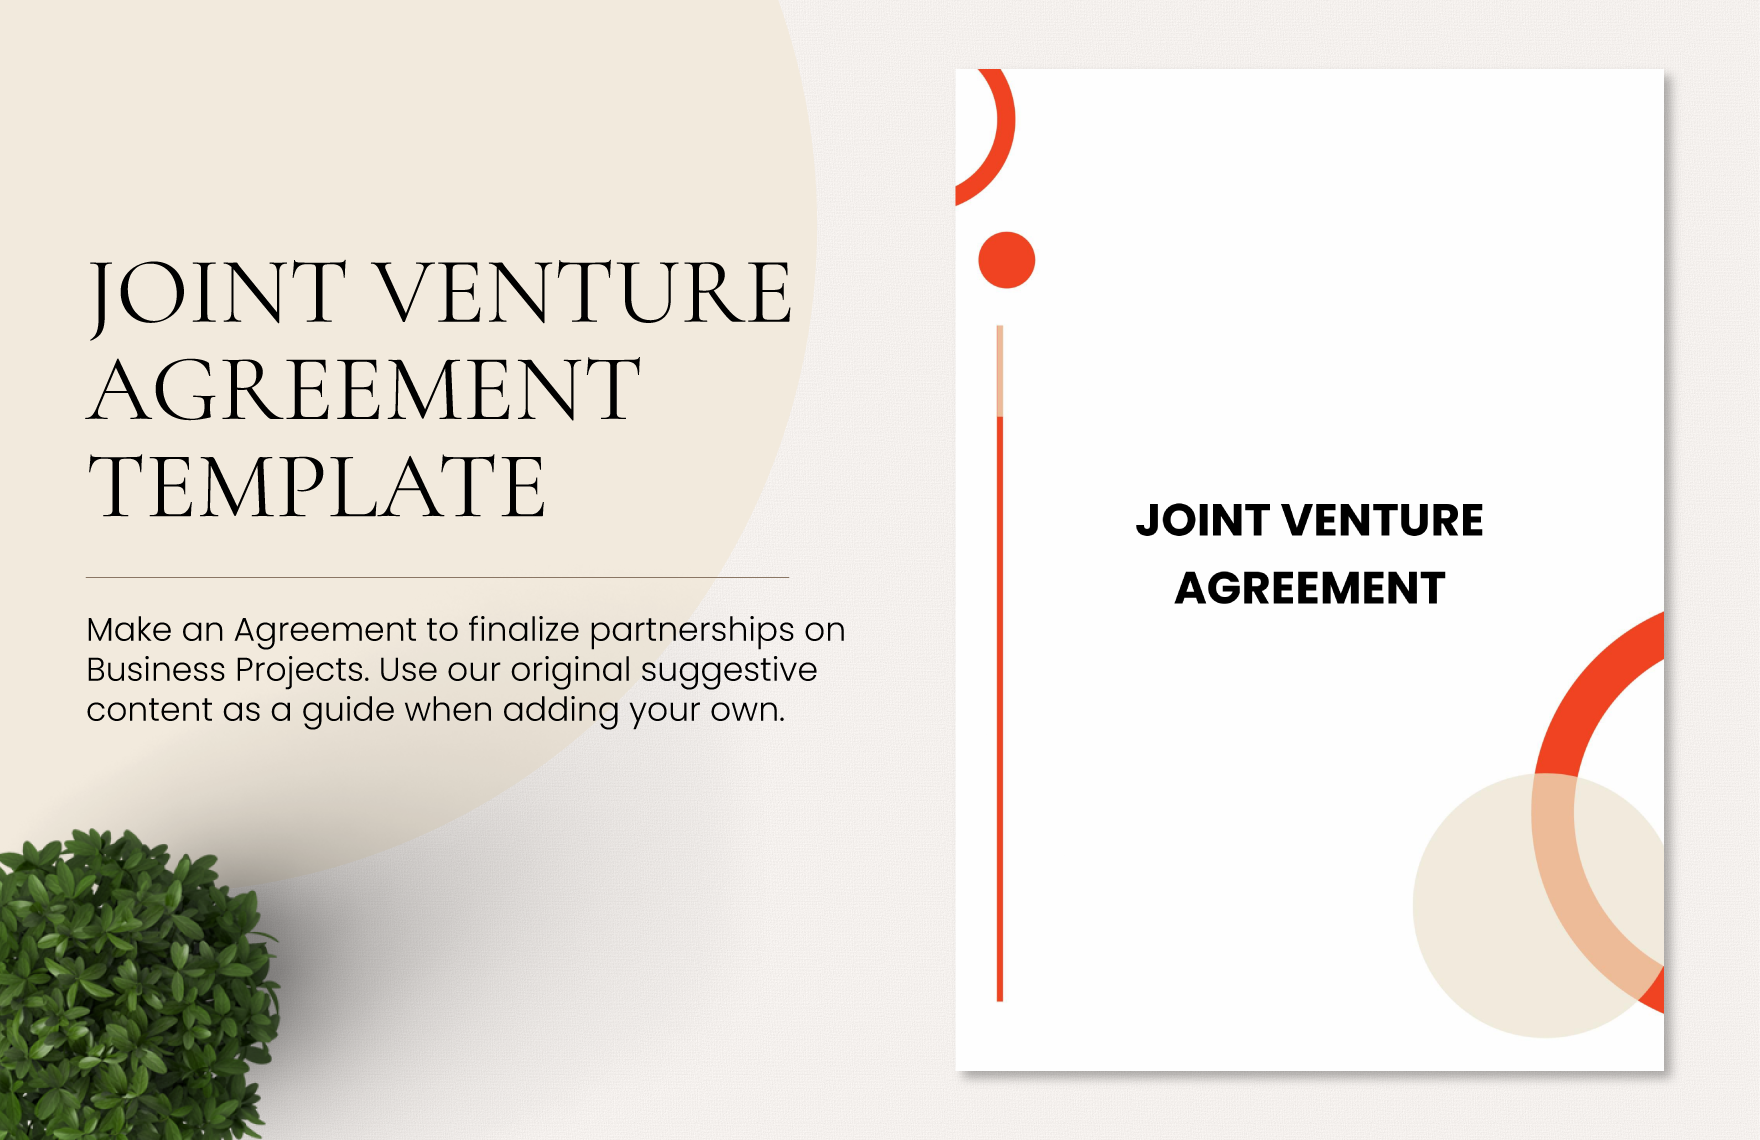 Joint Venture Agreement Template in Word, Google Docs, PDF, Apple Pages